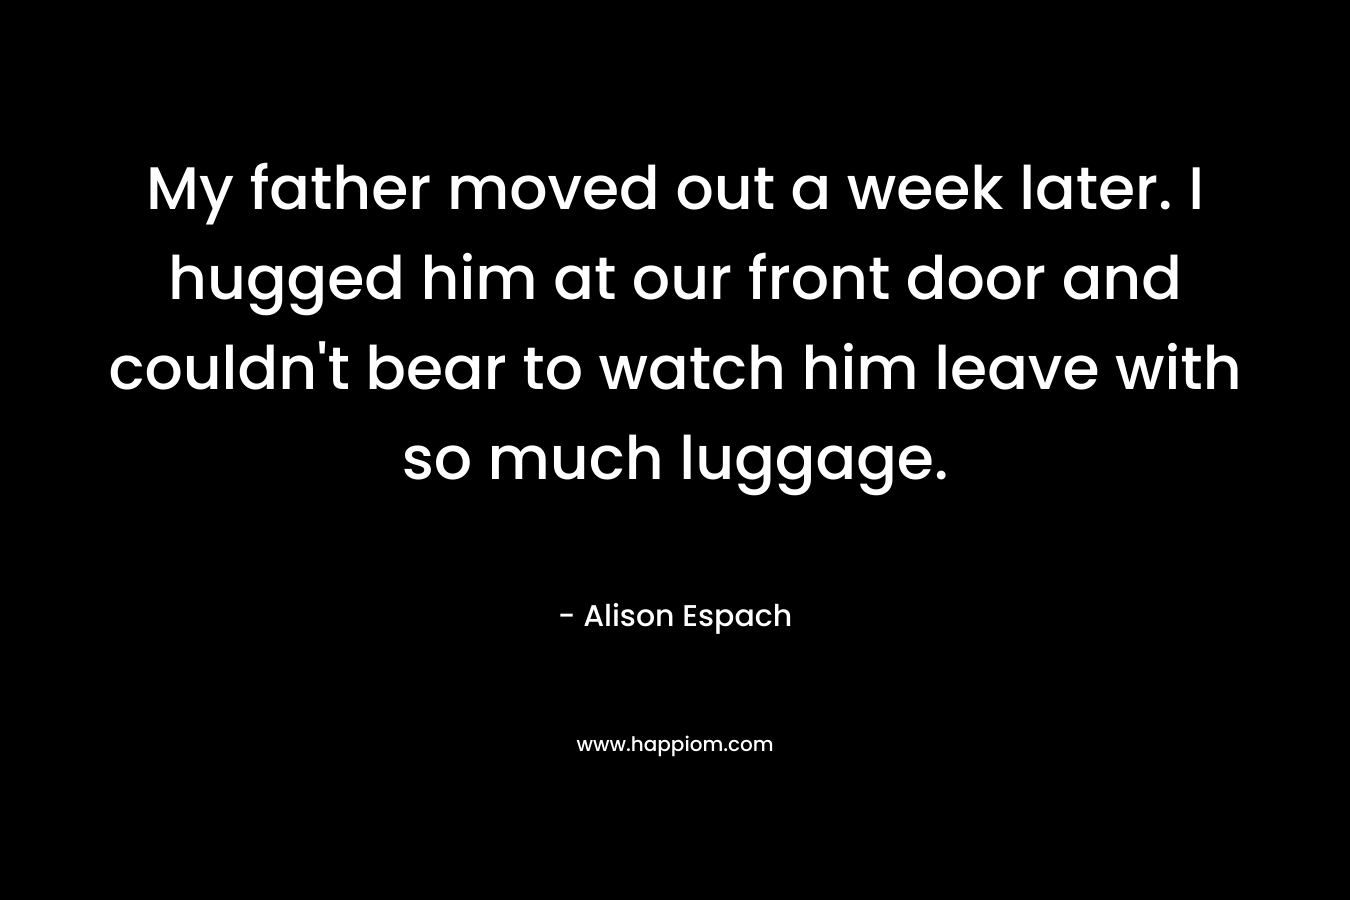 My father moved out a week later. I hugged him at our front door and couldn't bear to watch him leave with so much luggage.